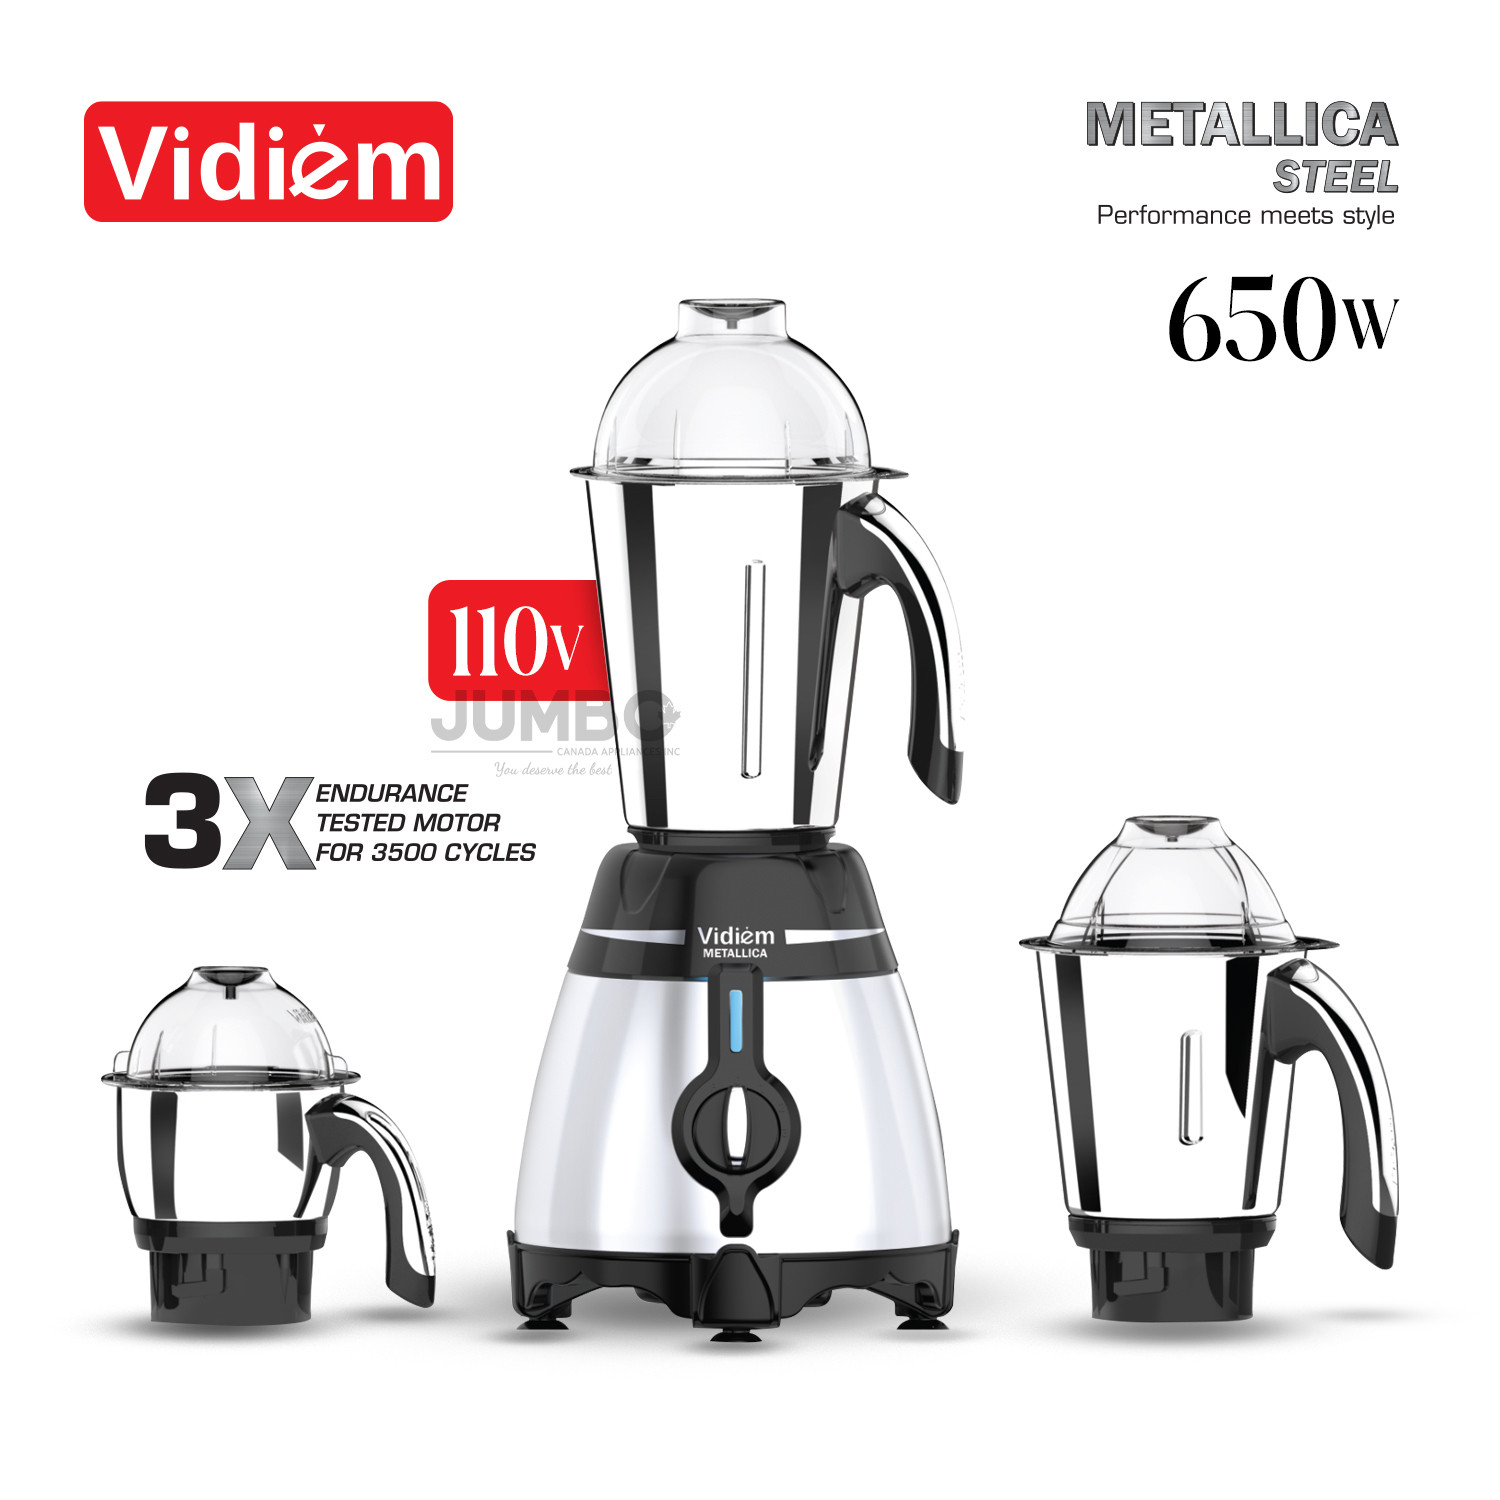 vidiem-metallica-steele-650w-110v-stainless-steel-jars-indian-mixer-grinder-with-spice-coffee-grinder-jar-for-use-in-canada-usa1